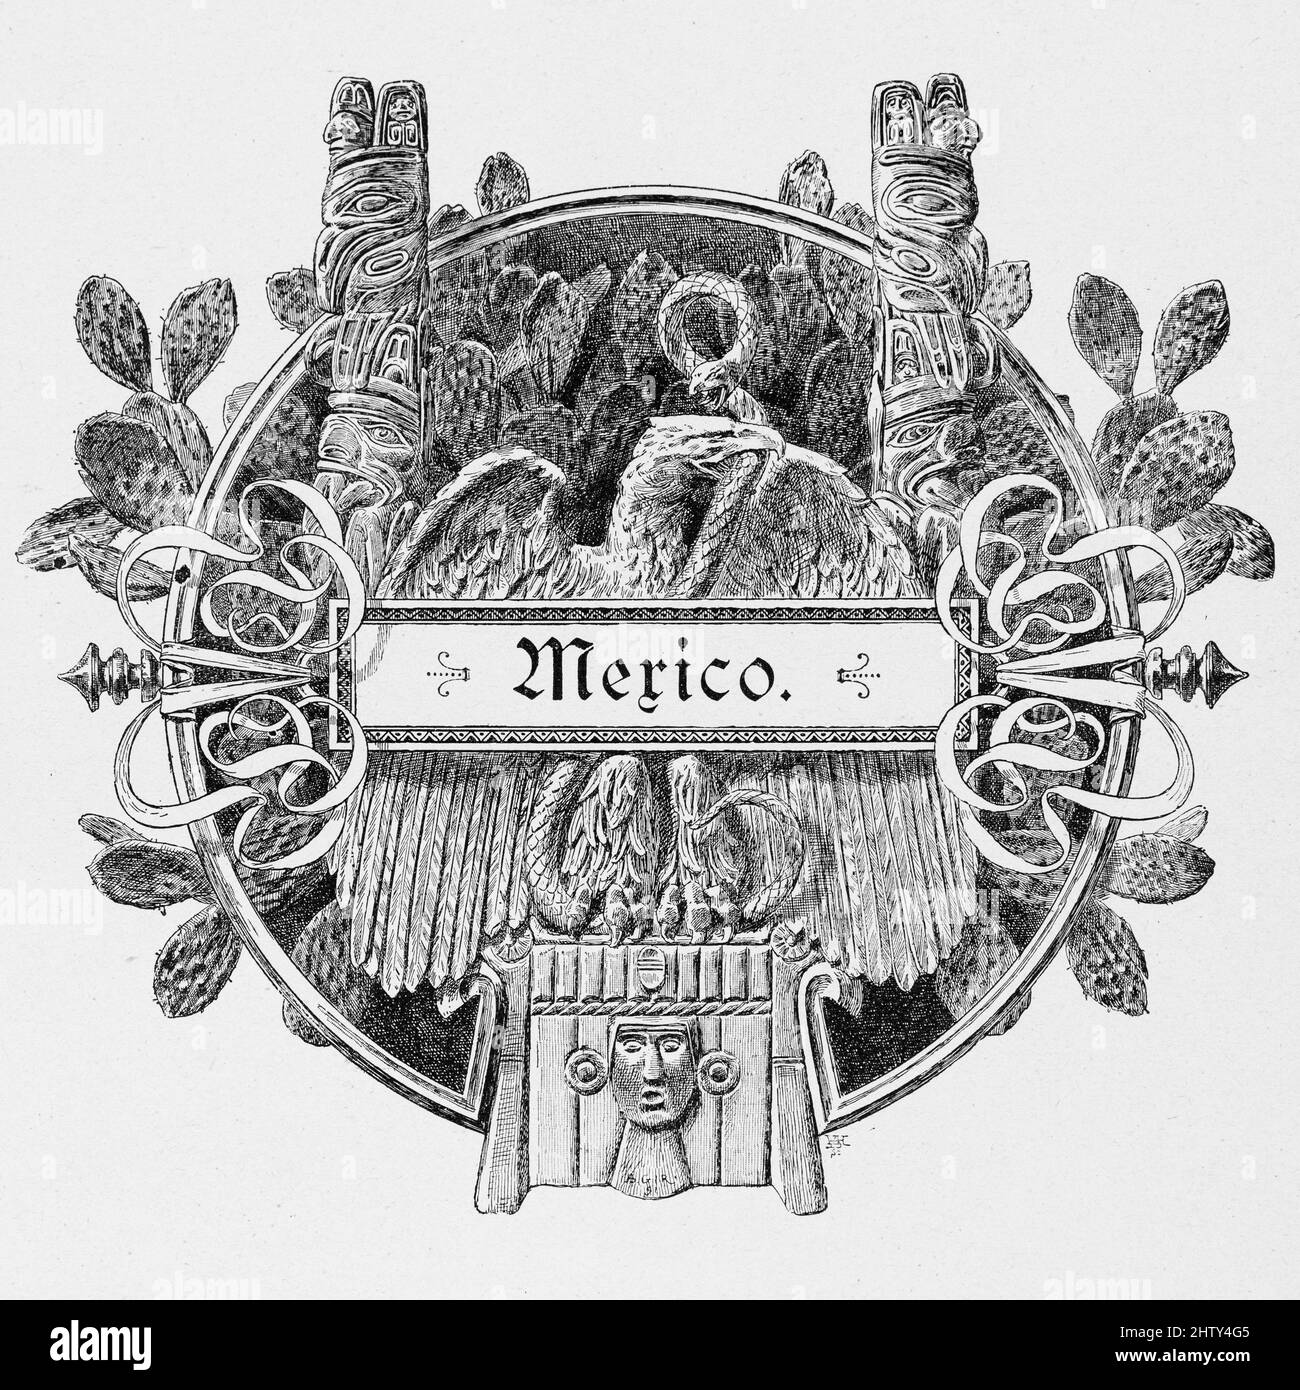 Emblem, Mexican eagle, Maya, ornaments, cacti, historical illustration from 1897, Mexico City, Mexico, Central America Stock Photo